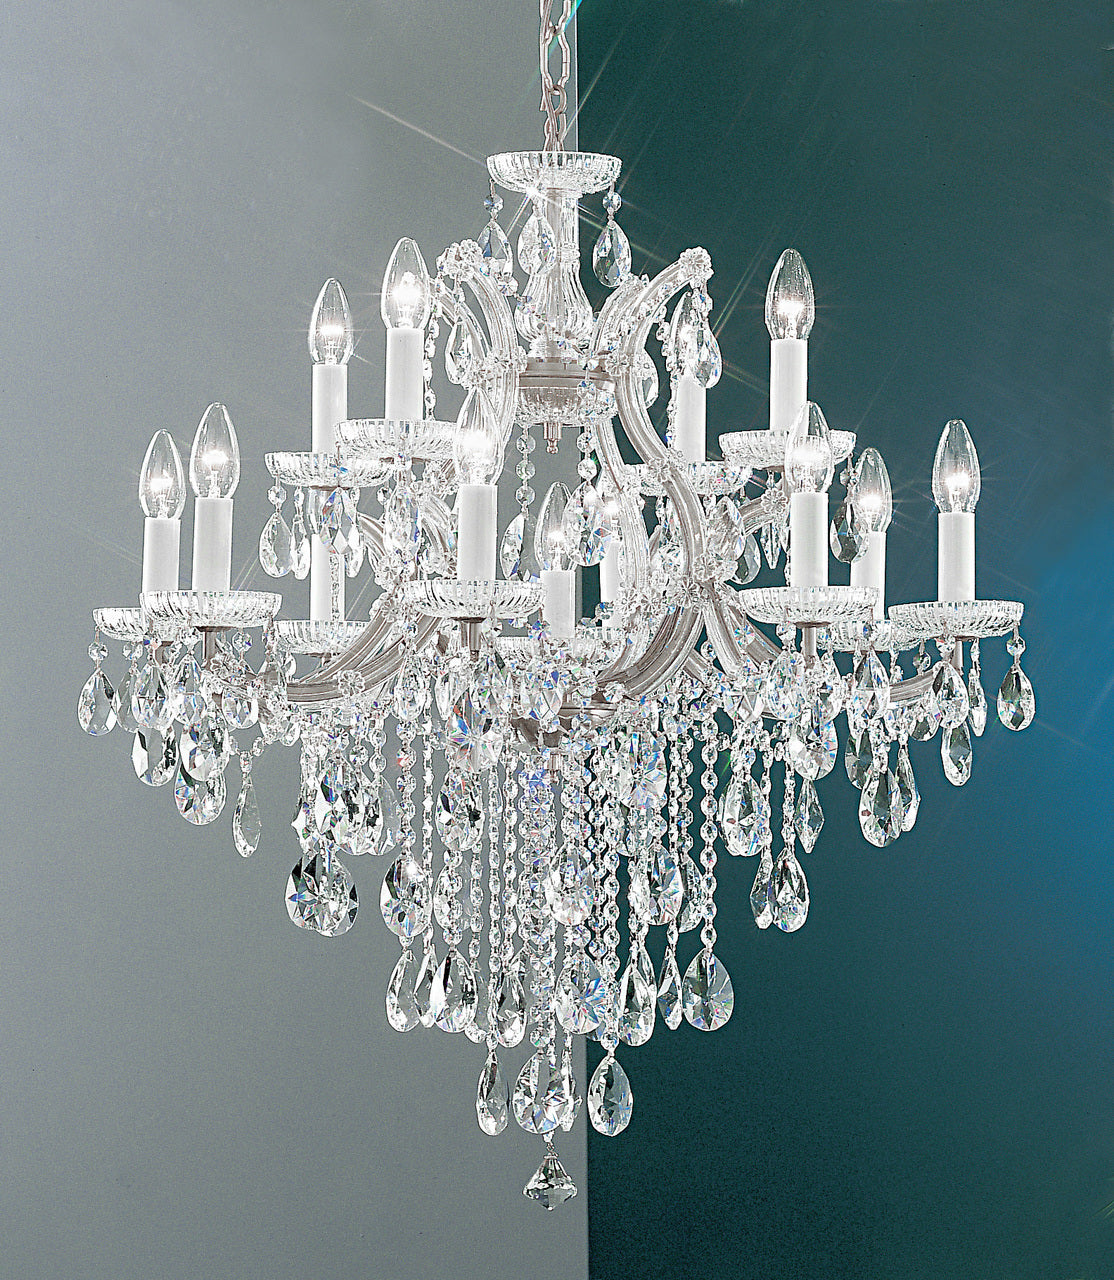 Classic Lighting 8124 CH S Maria Theresa Traditional Crystal Chandelier in Chrome (Imported from Italy)